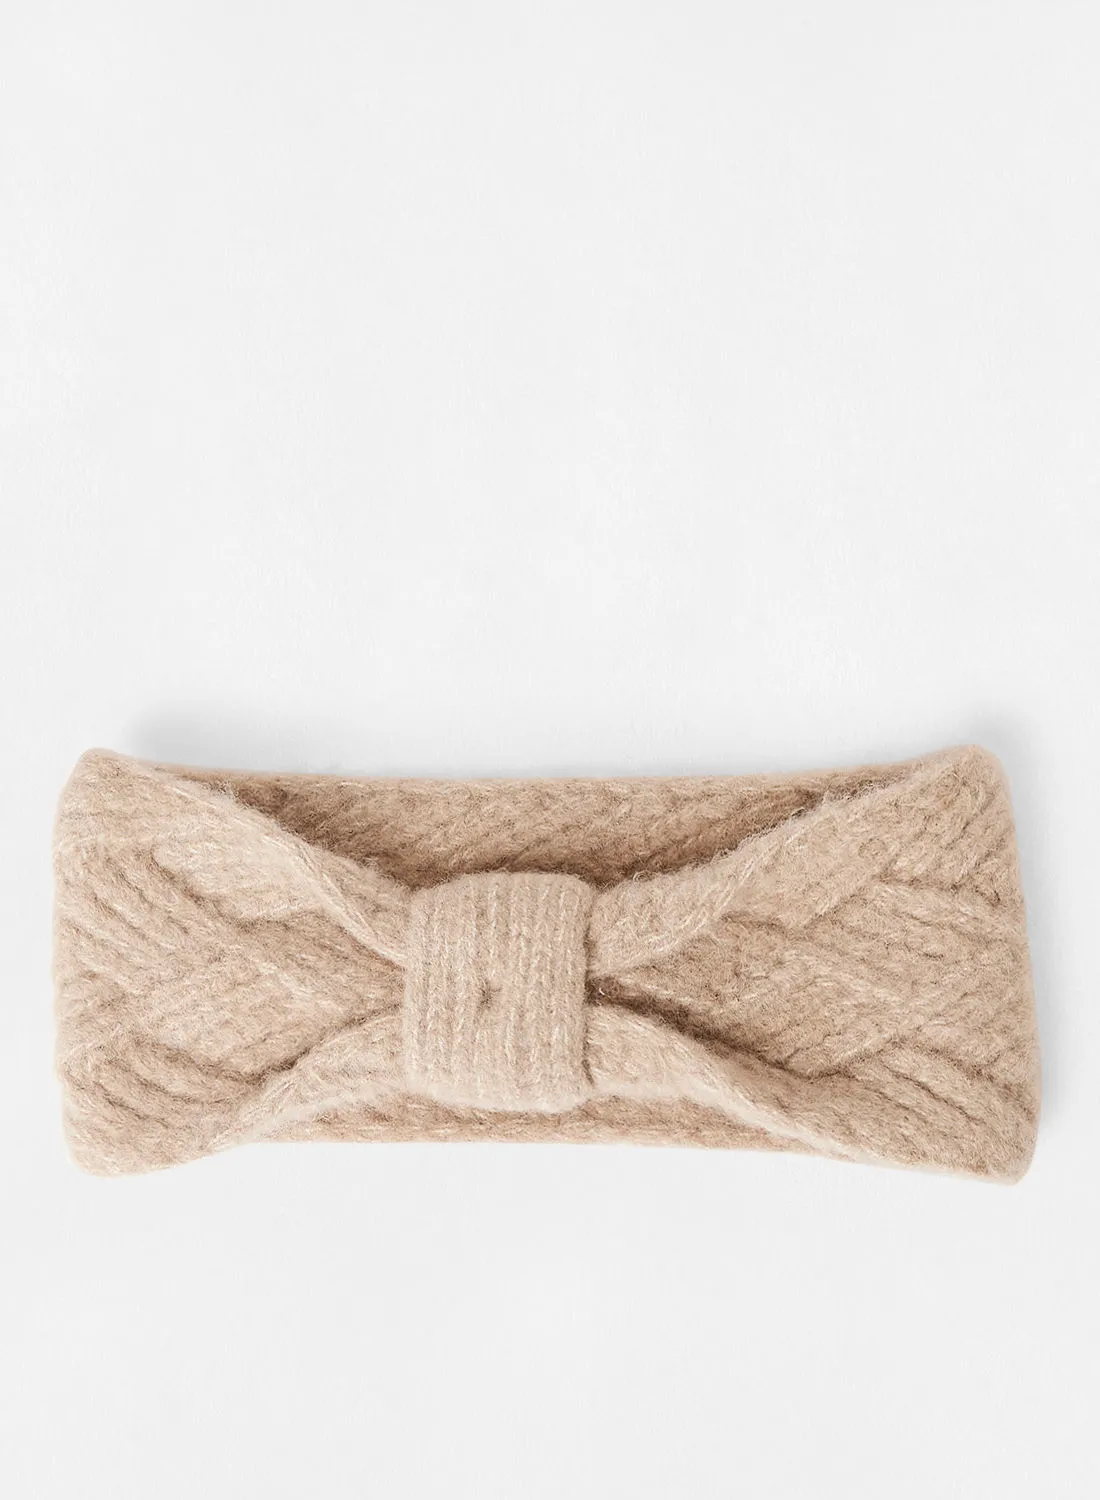 PIECES Knotted Headband Light Brown